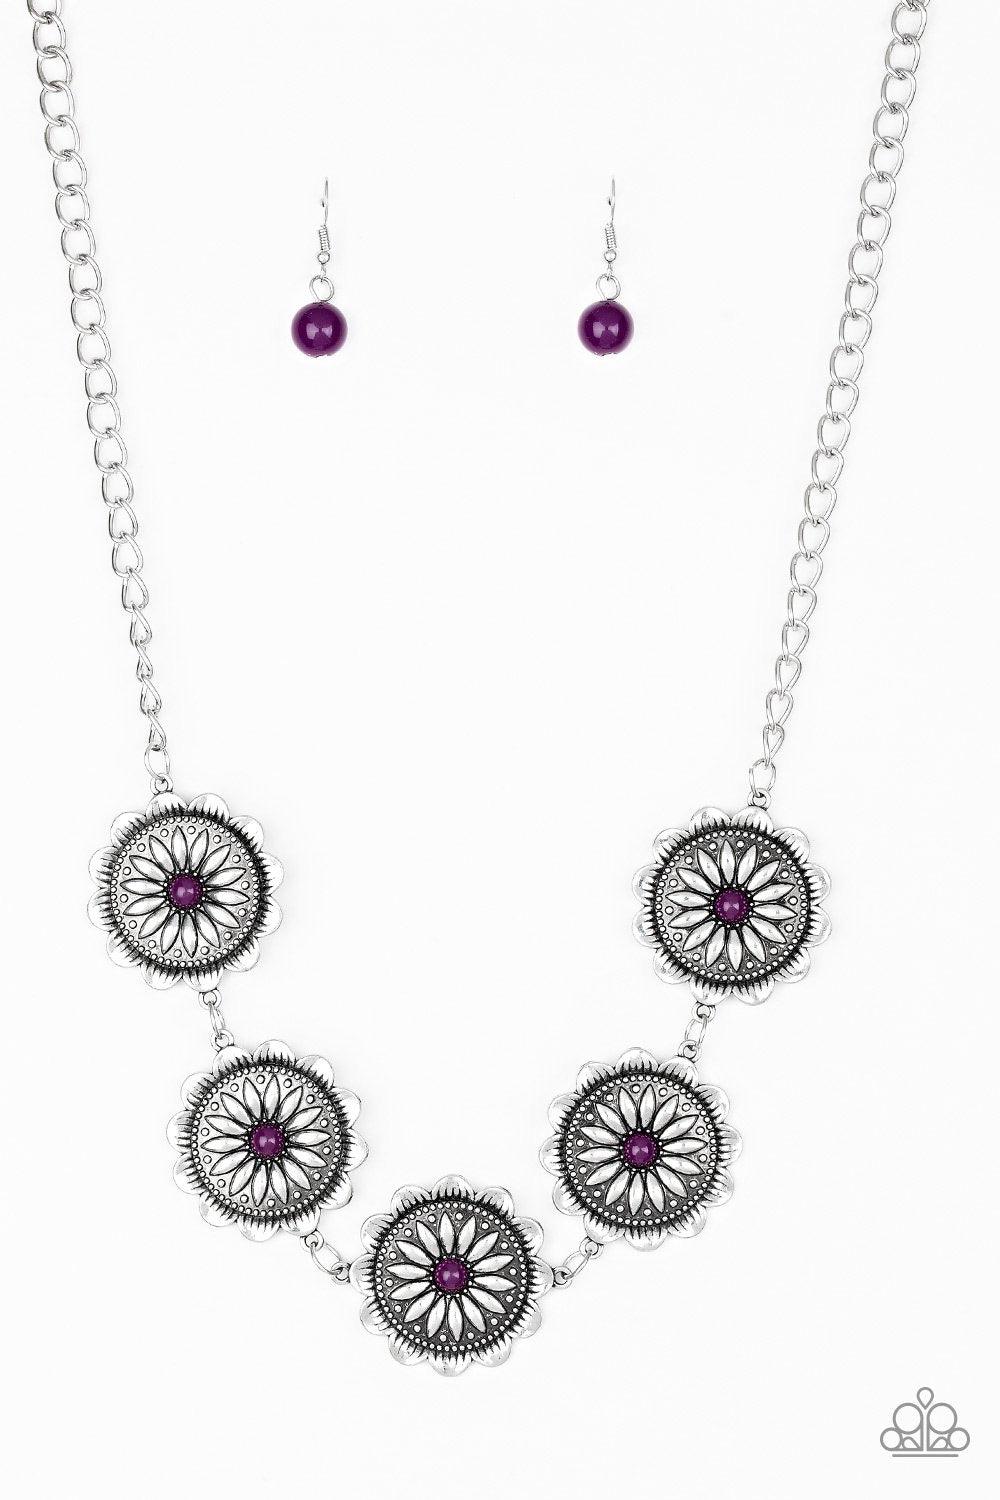 Paparazzi Accessories Me-dallions, Myself, and I - Purple Infused with shiny plum beaded centers, ornate floral stamped frames link below the collar for a colorfully, seasonal look. Features an adjustable clasp closure. Sold as one individual necklace. In